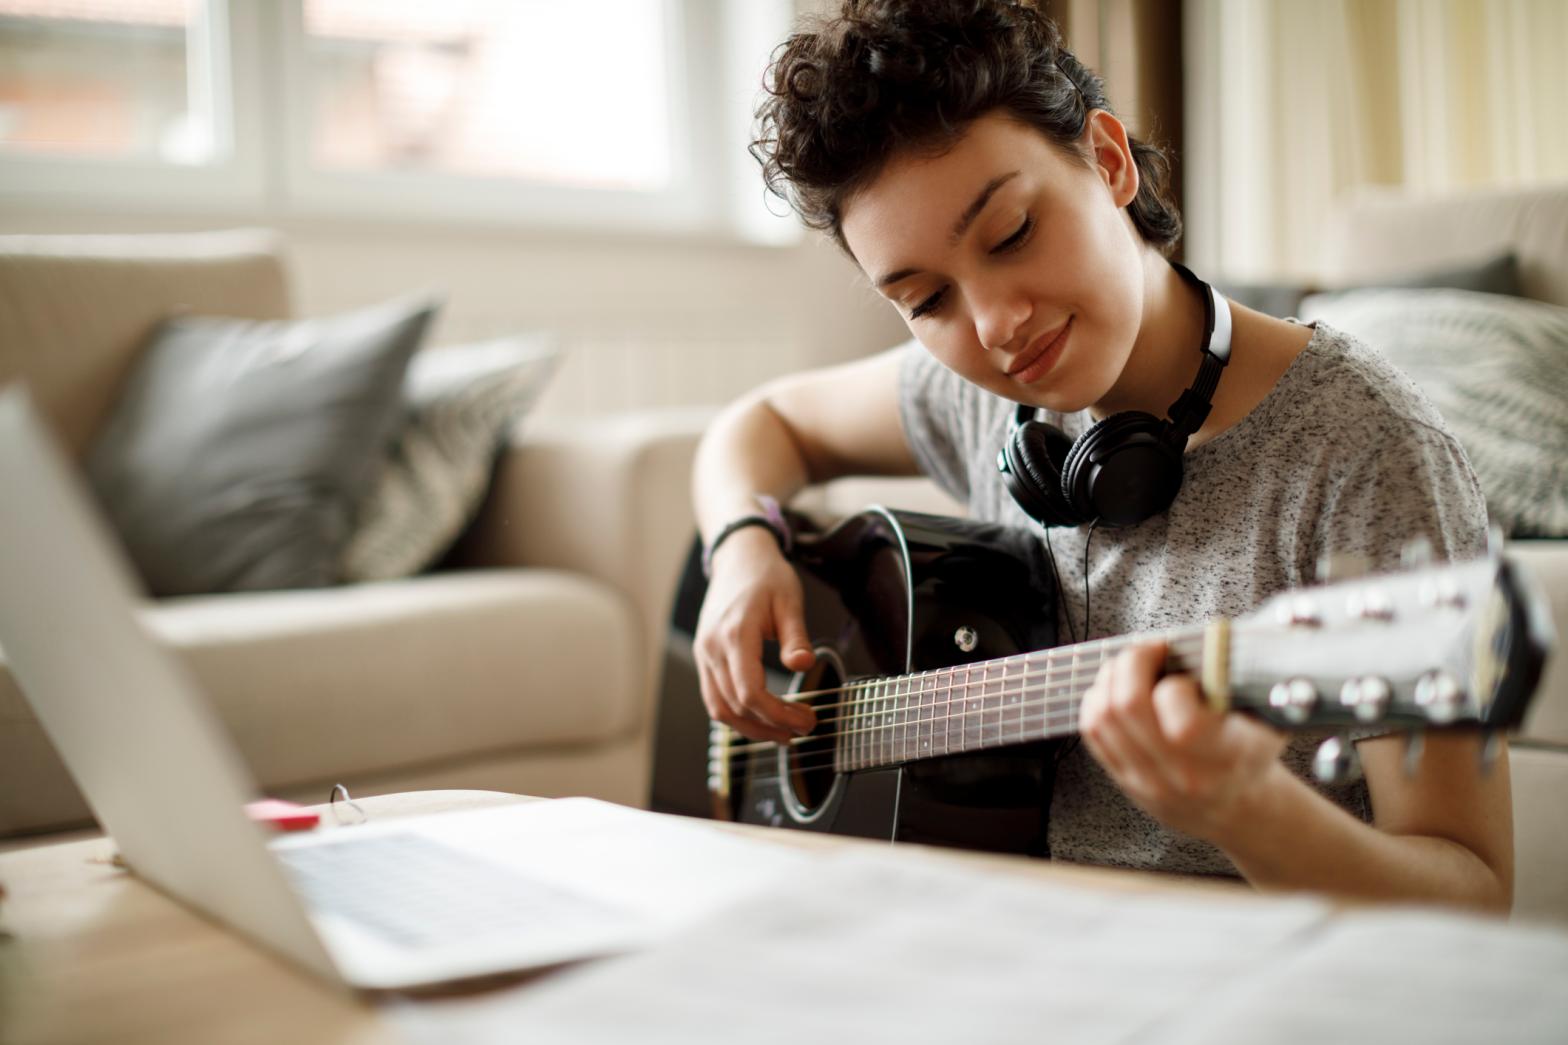 picking up the guitar is a fun way to rekindle your love of learning